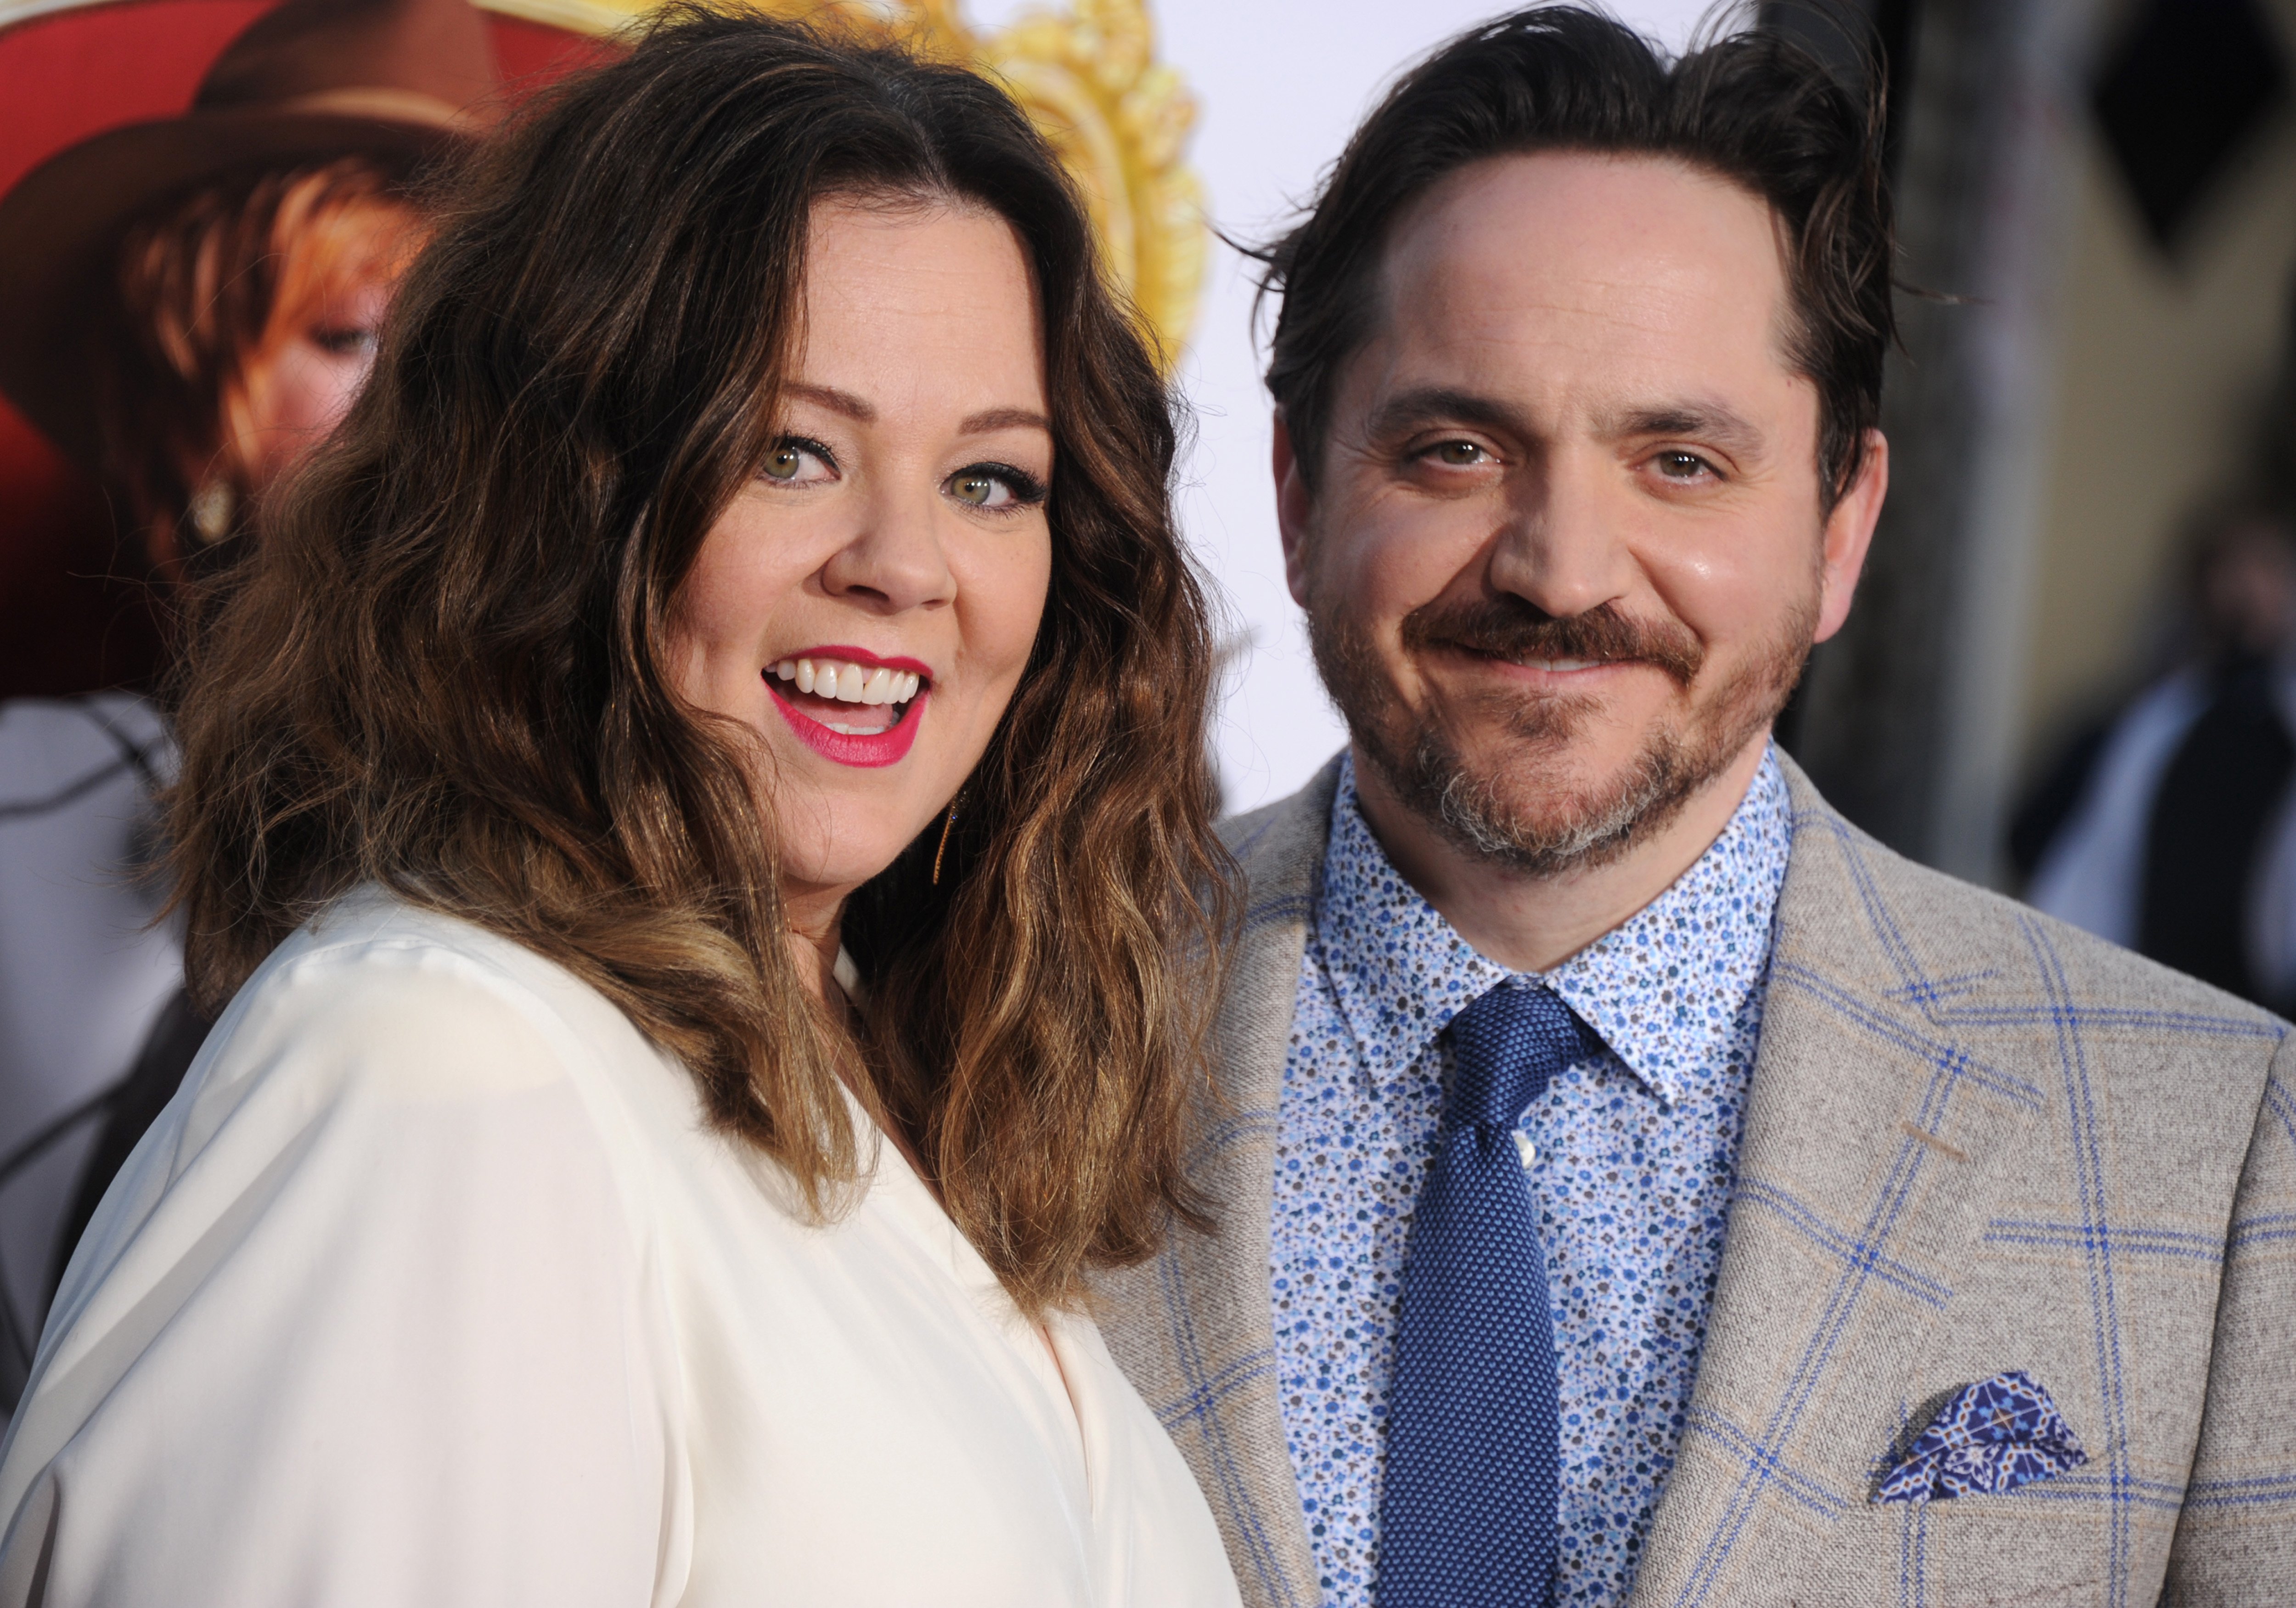 Melissa McCarthy and spouse Ben Falcone arrive at the premiere of "The Boss" at Regency Village Theatre on March 28, 2016 in Westwood, California. / Source: Getty Images